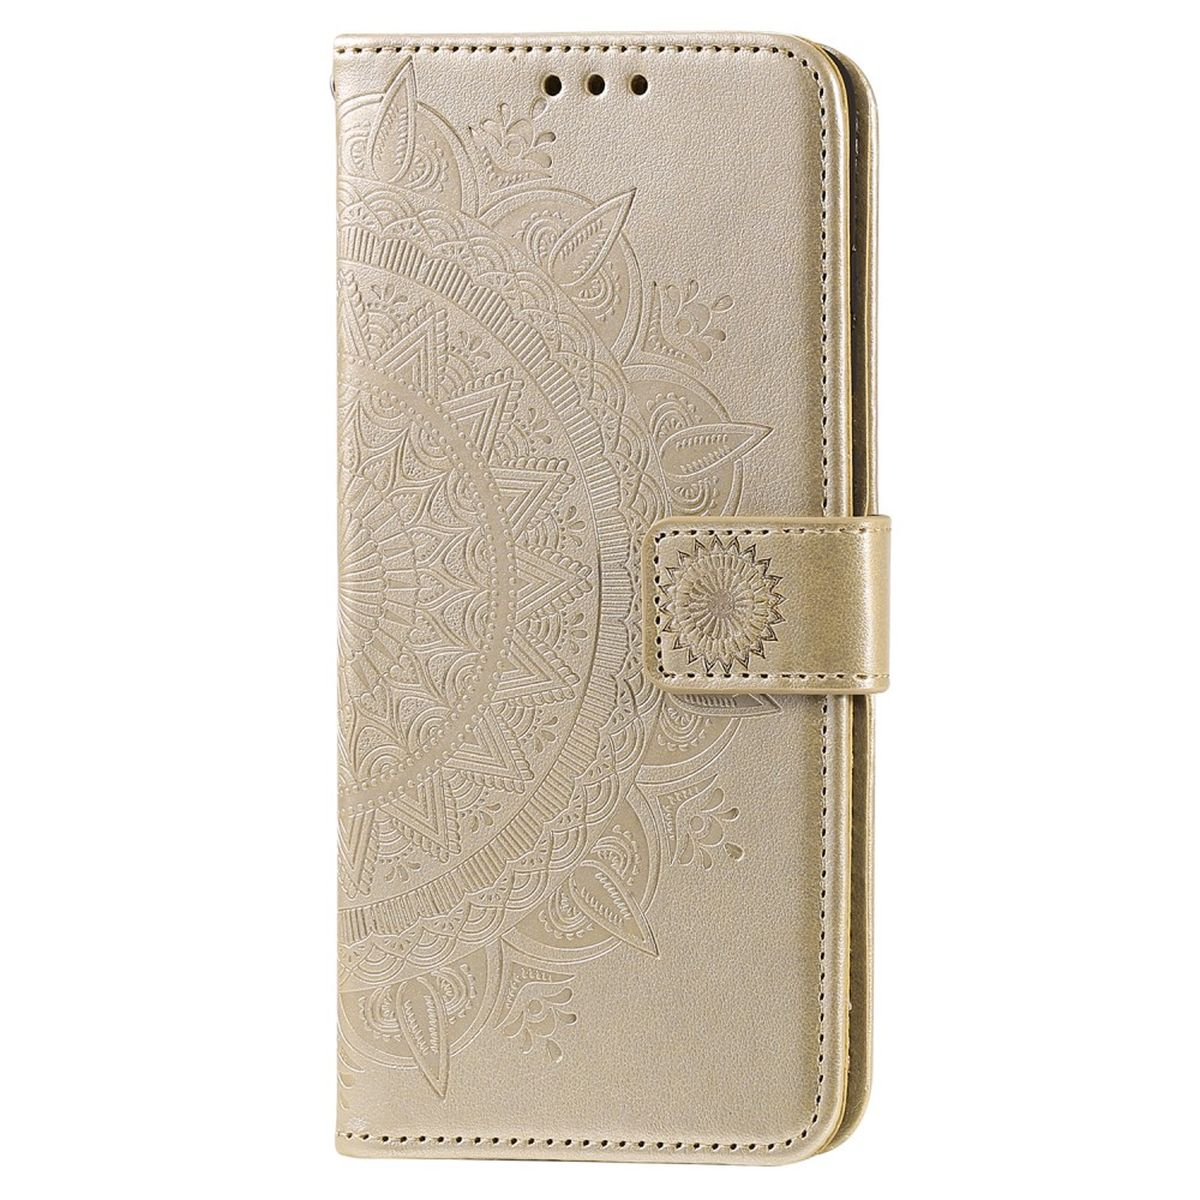 Mandala Klapphülle Galaxy Gold Samsung, Muster, Bookcover, COVERKINGZ mit A23,